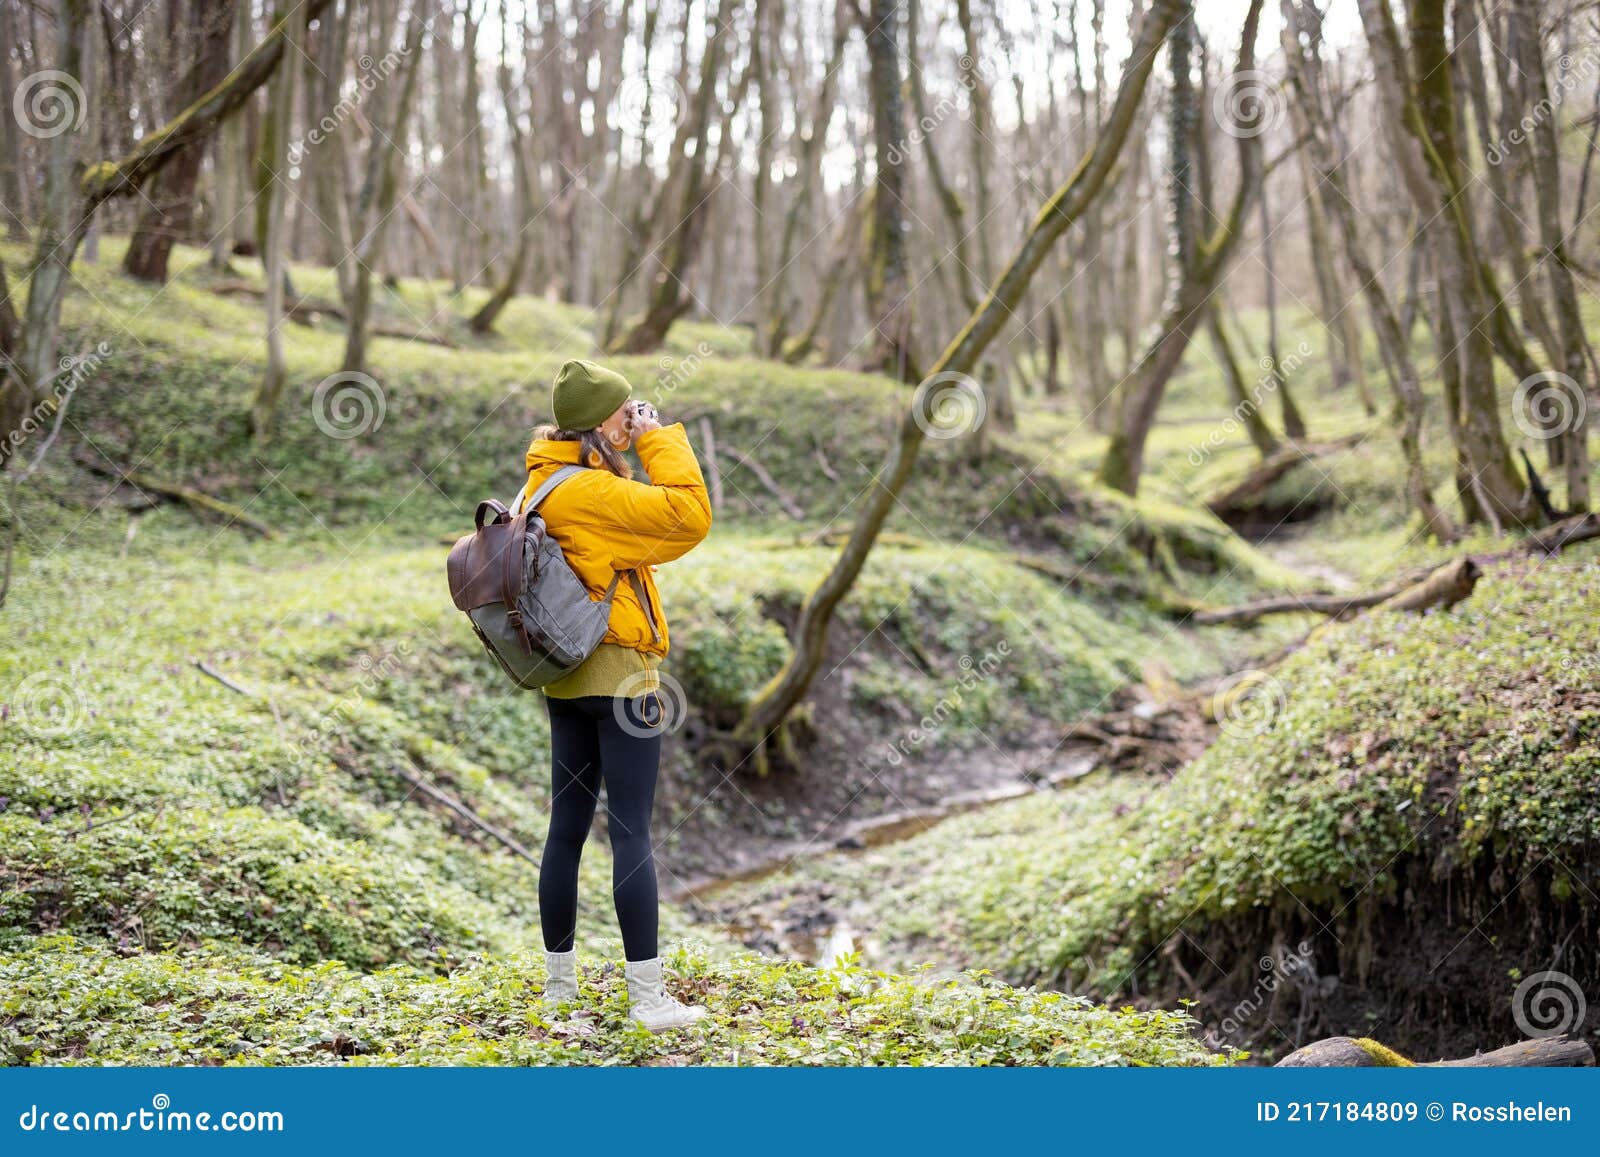 Woman In Hiking Clothes With Camera In Forest Stock Photo Image Of Travel,  Trekking: 217186842